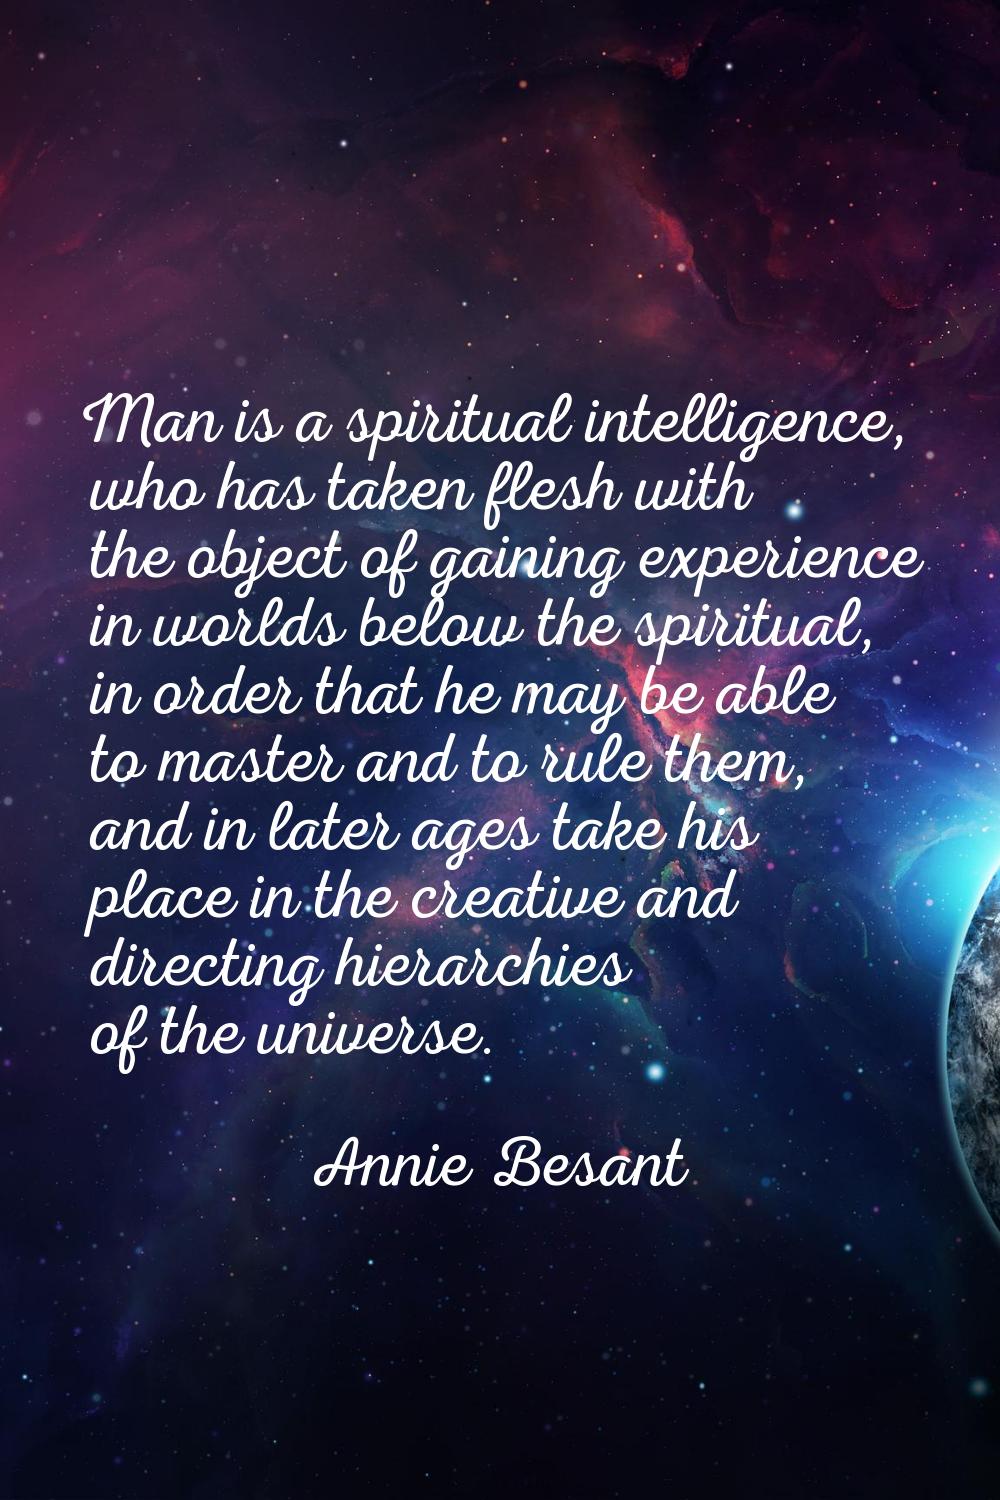 Man is a spiritual intelligence, who has taken flesh with the object of gaining experience in world